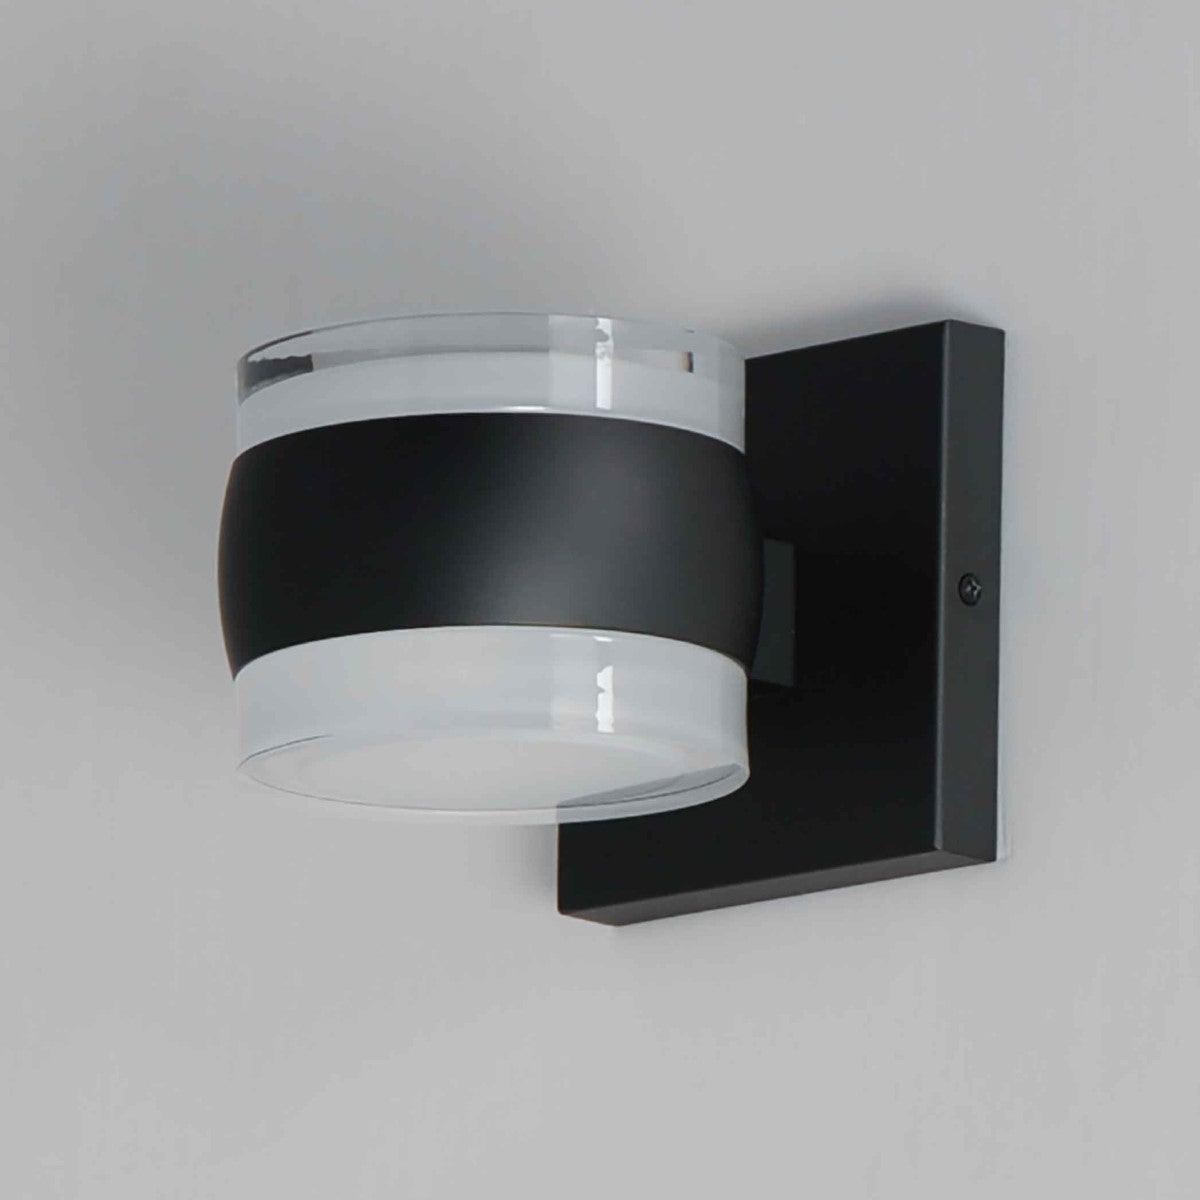 Modular 5 in. Cylinder LED Outdoor Wall Sconce 3000K Black Finish